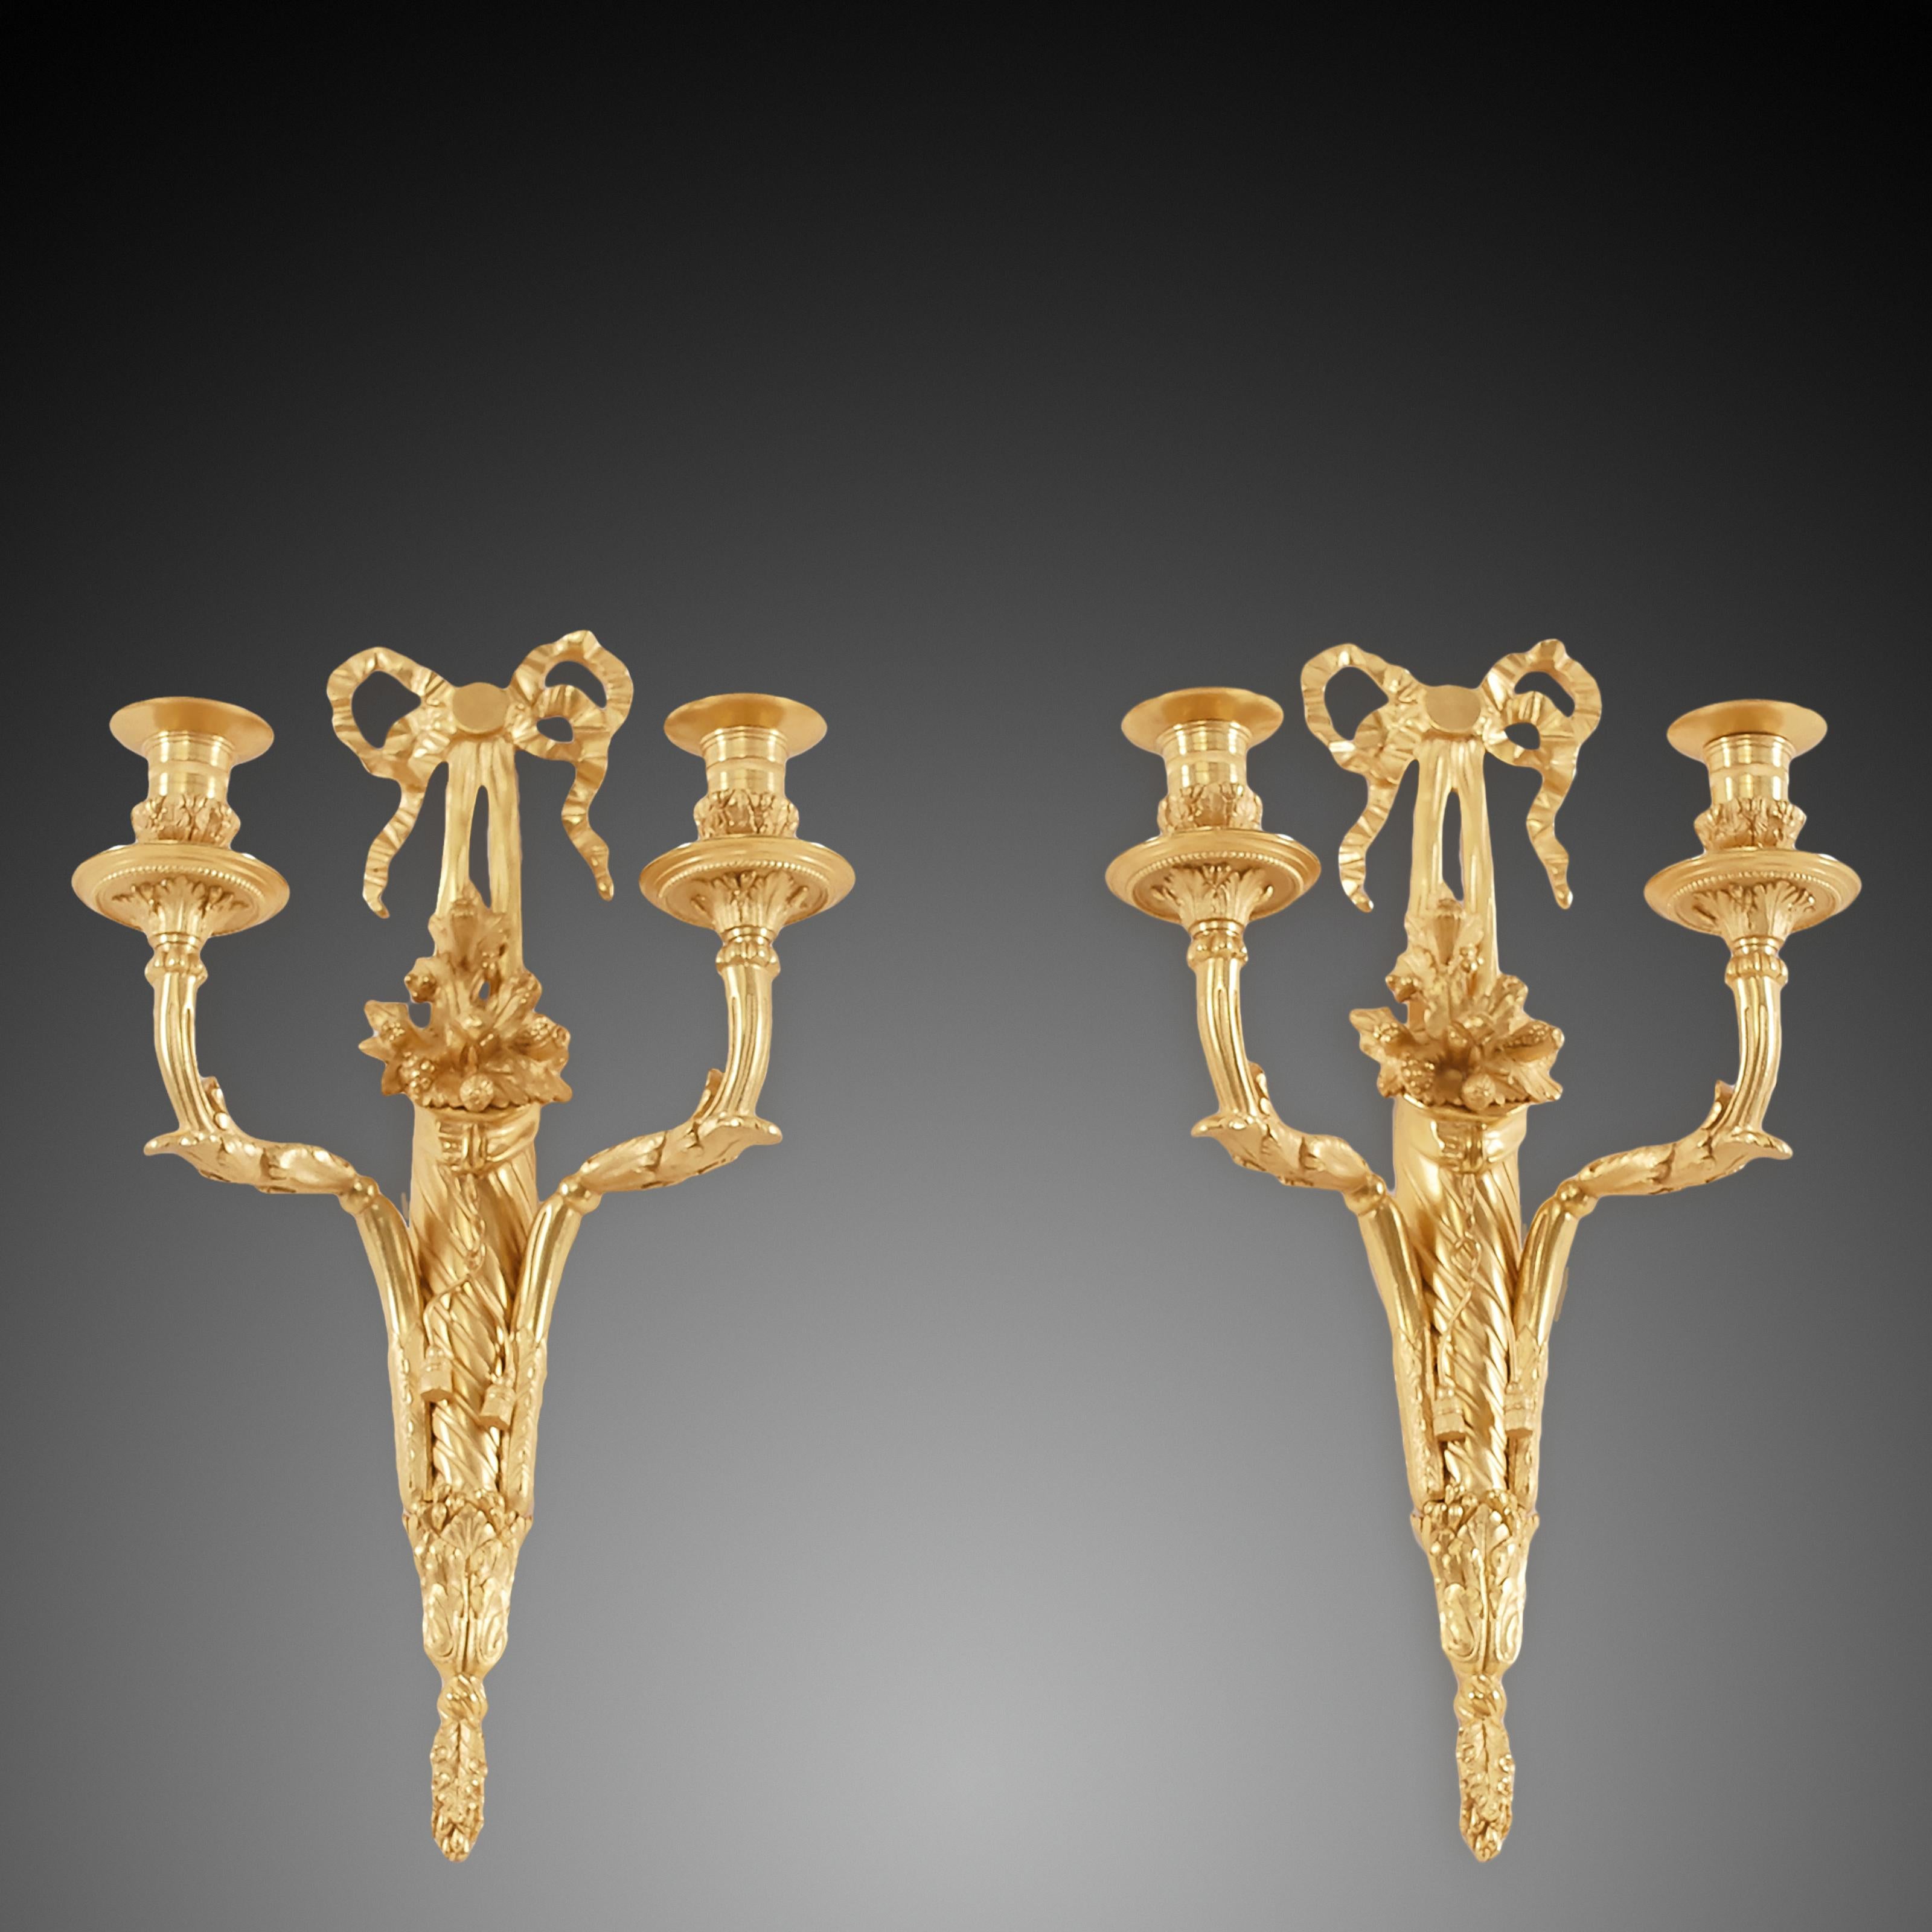 Pair of candle sconces with two cornucopia styled arms made from ormolu, handcrafted by master craftsmen in the 19th century..The pair of antique wall sconces have a distinct French Louis XVI style, which shows flexibility with the characteristic